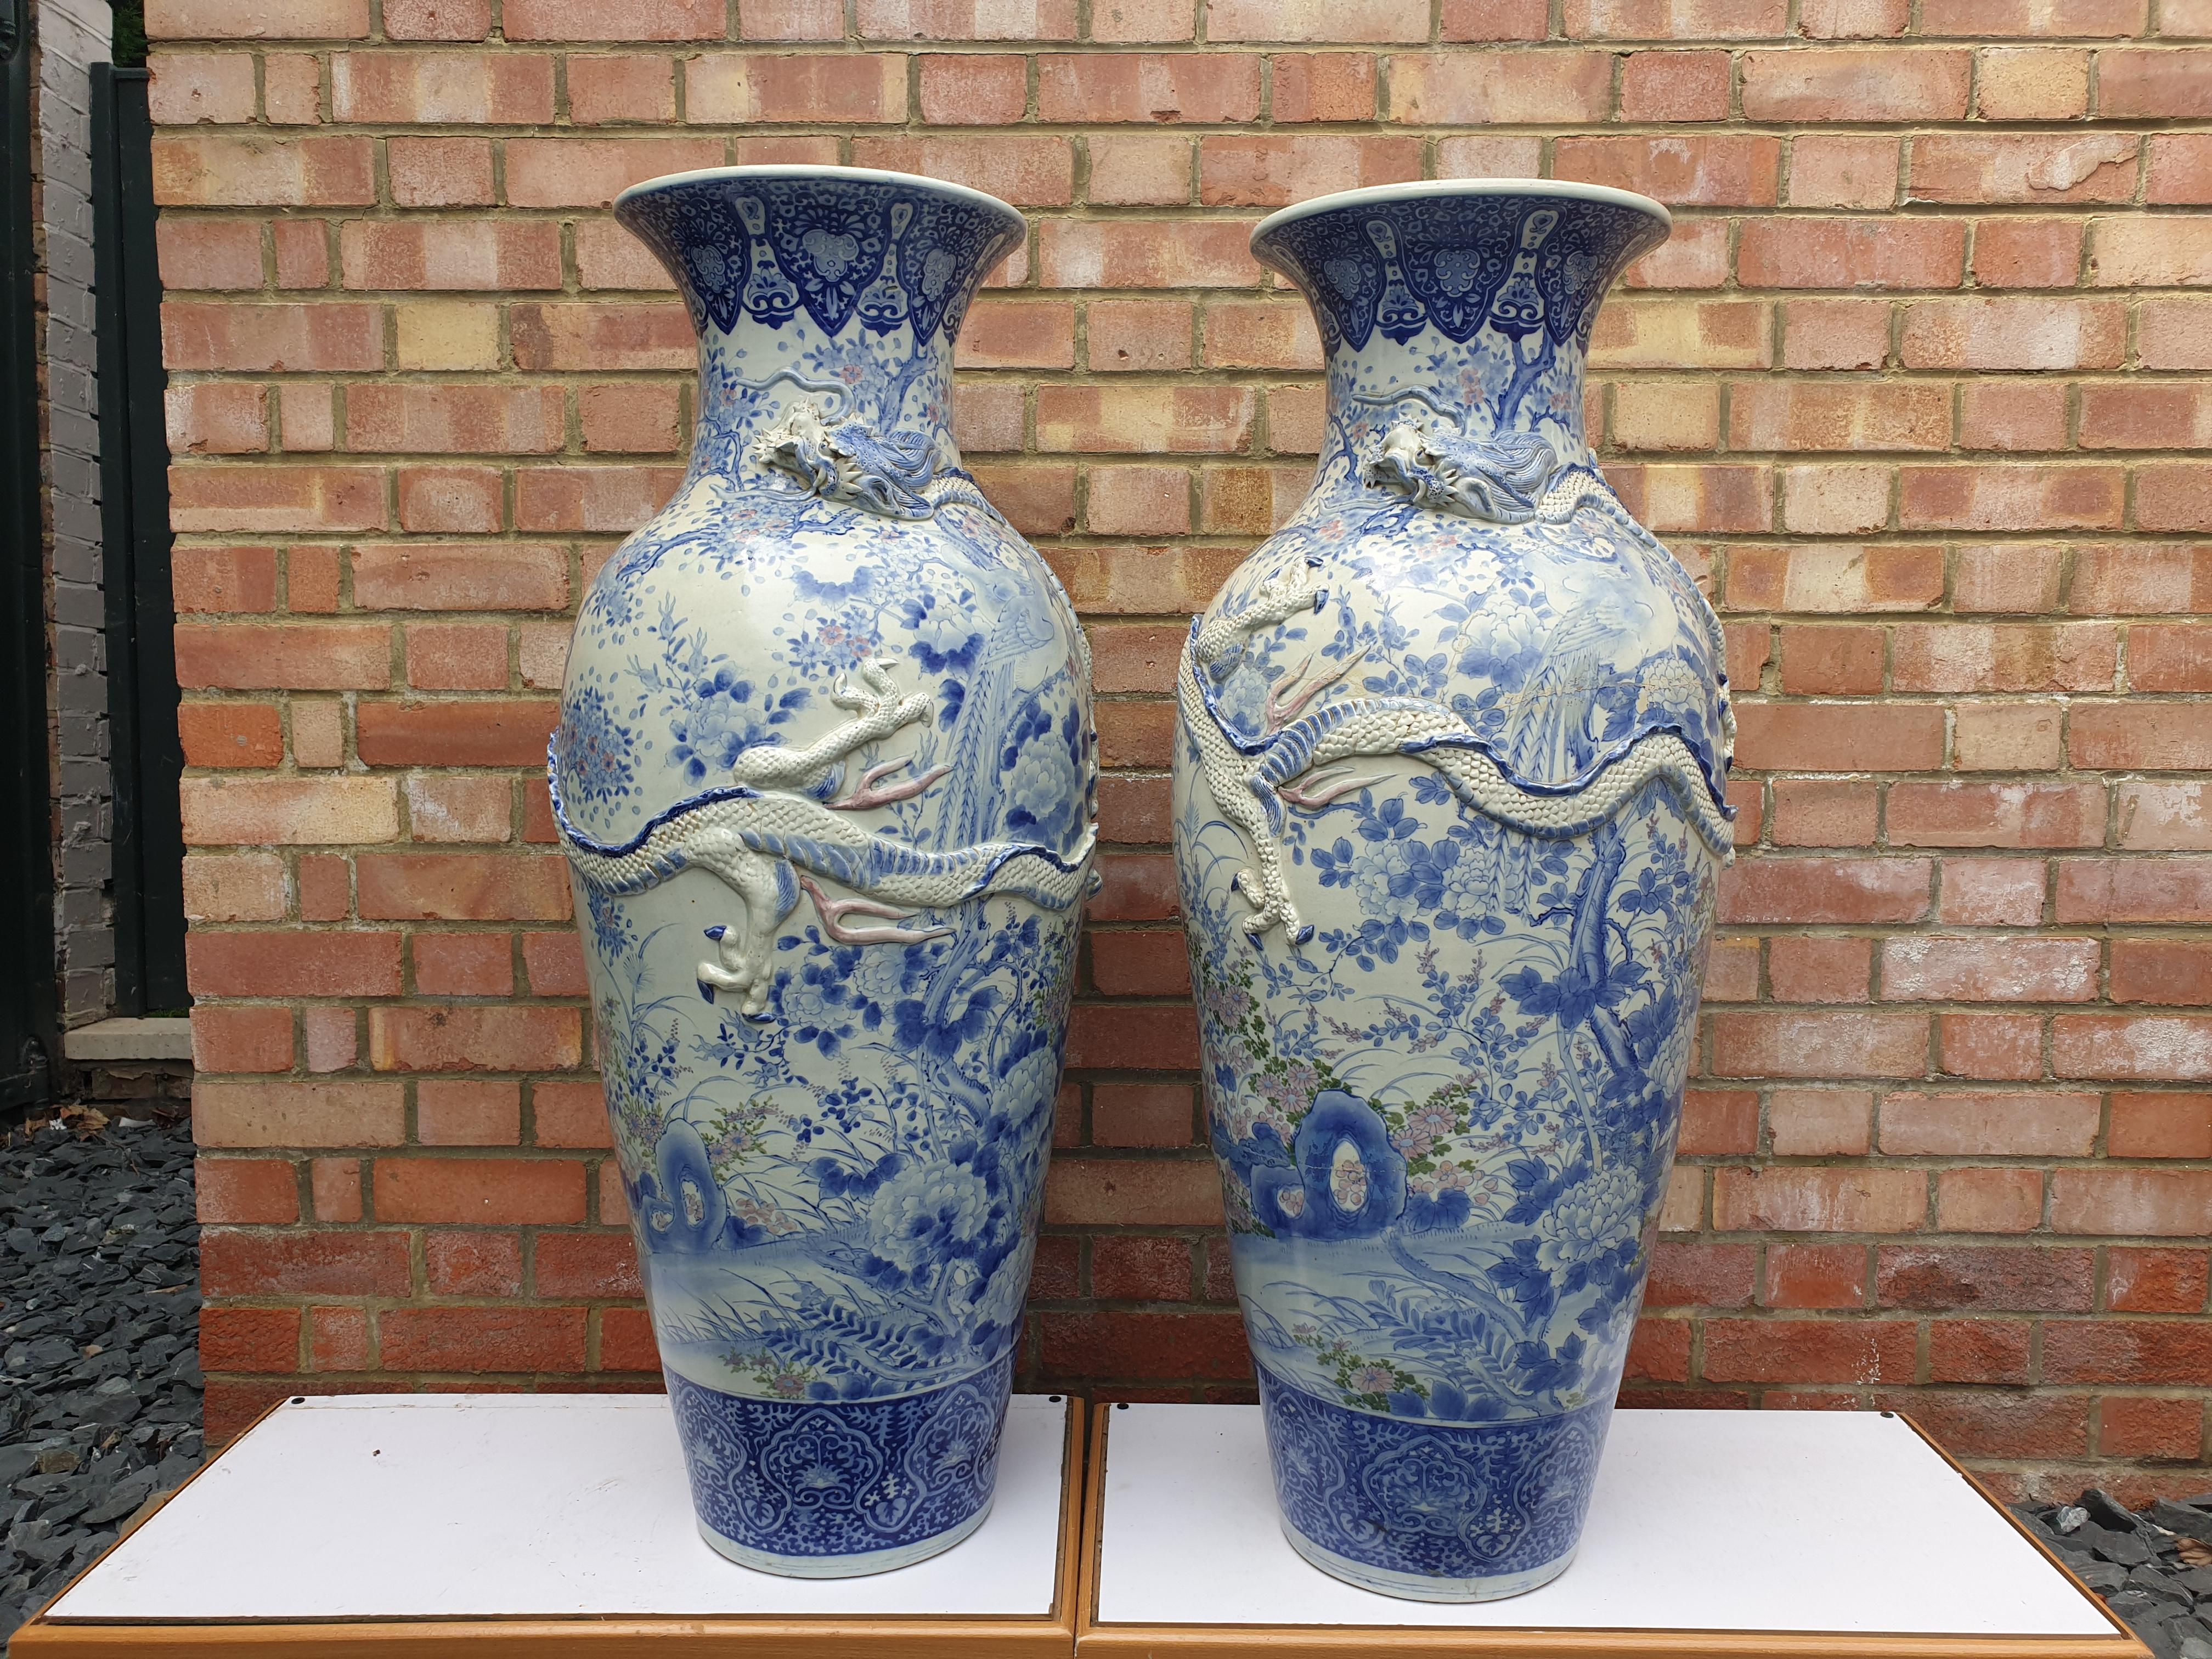 An impressive pair of Japanese vases standing upright with a short neck and a turned out top rim or lip. In traditional colors of blue and white with embossed three claw molded dragons wrapped around the center body of the vases. Some flowers are